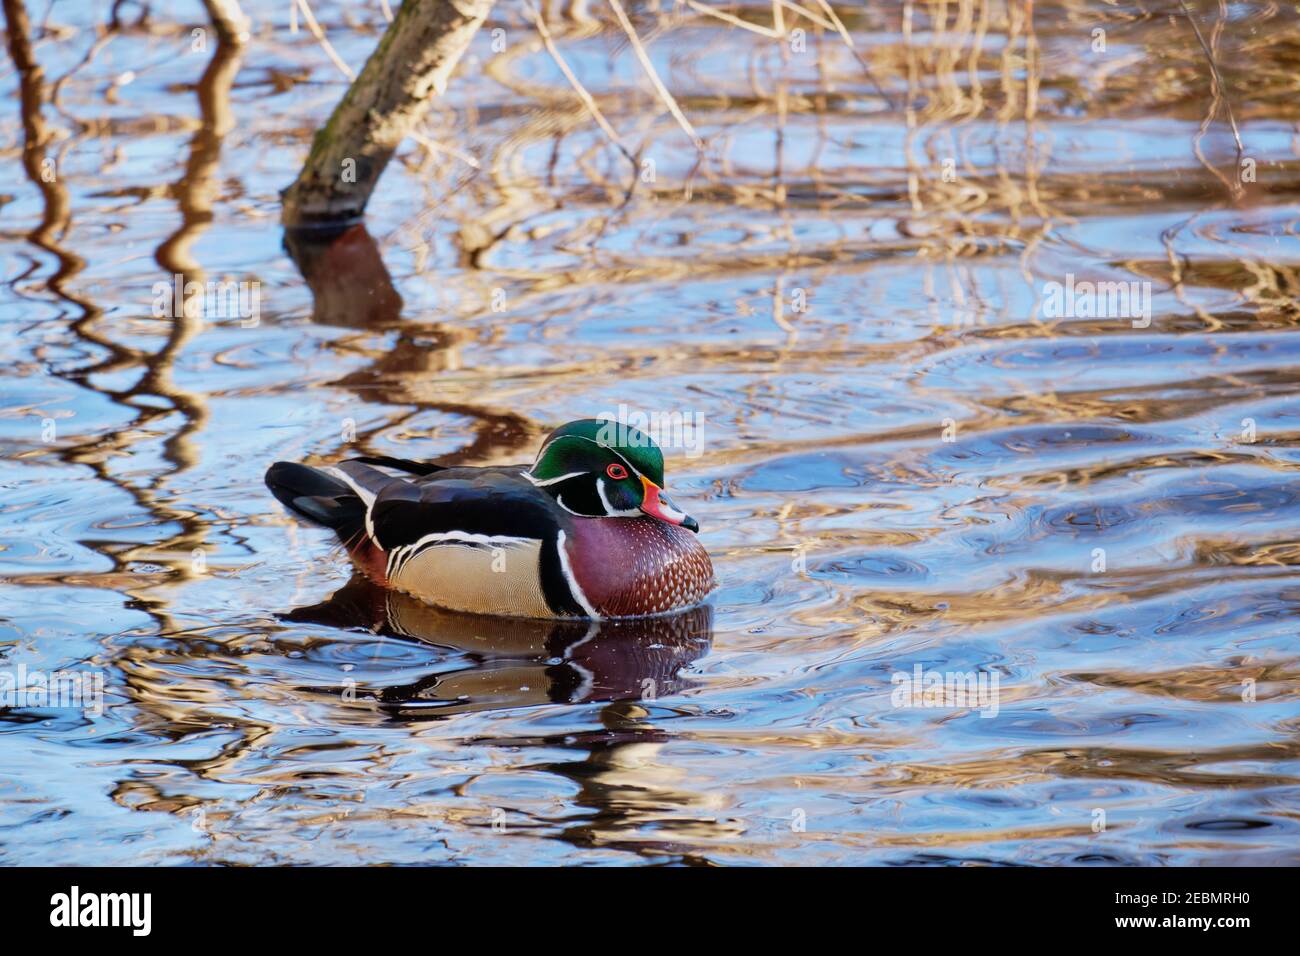 Colourful wood duck swimming on gently rippled Lost Lagoon in January.  Gently rippled water reflects blue sky and pale, straw coloured vegetation Stock Photo